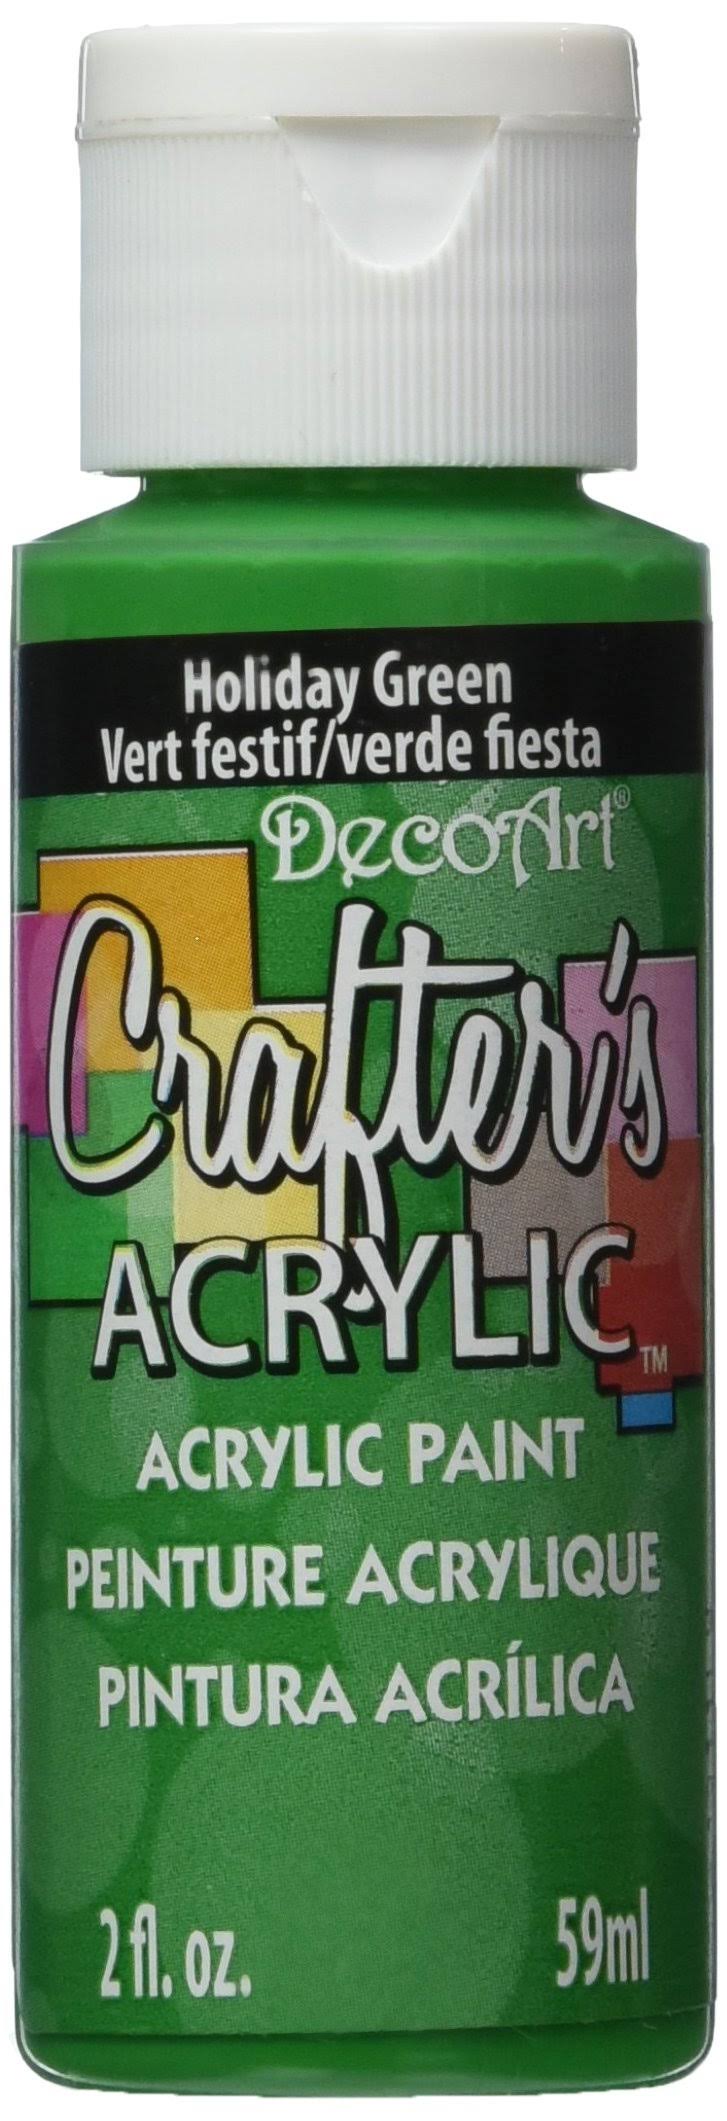 DecoArt Crafters Acrylic Paint - Holiday Green, 2oz